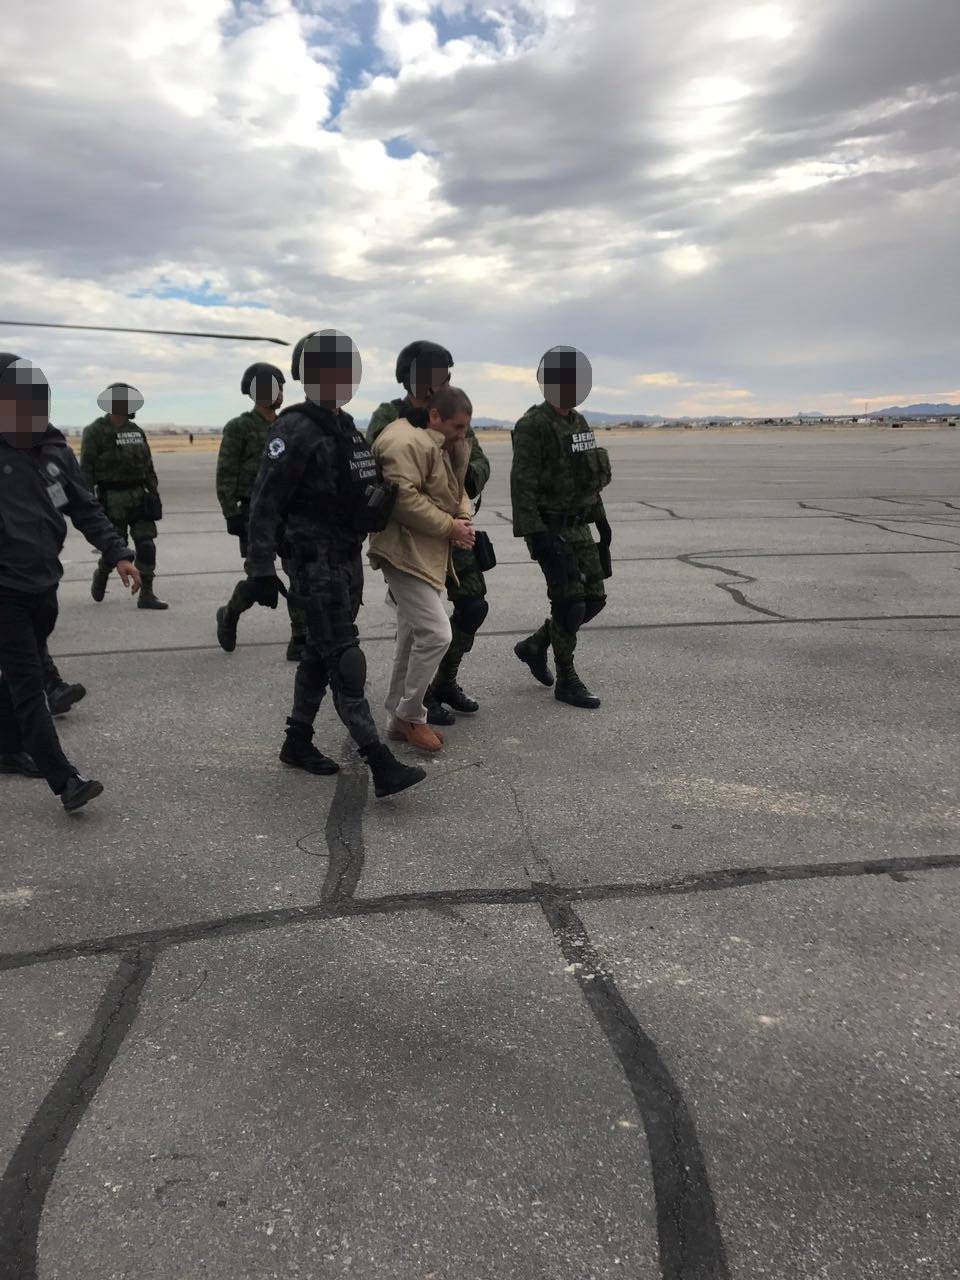 Mexico's top drug lord Joaquin "El Chapo" Guzman is escorted by soldiers in Ciudad Juarez, Mexico, as he is extradited to New York